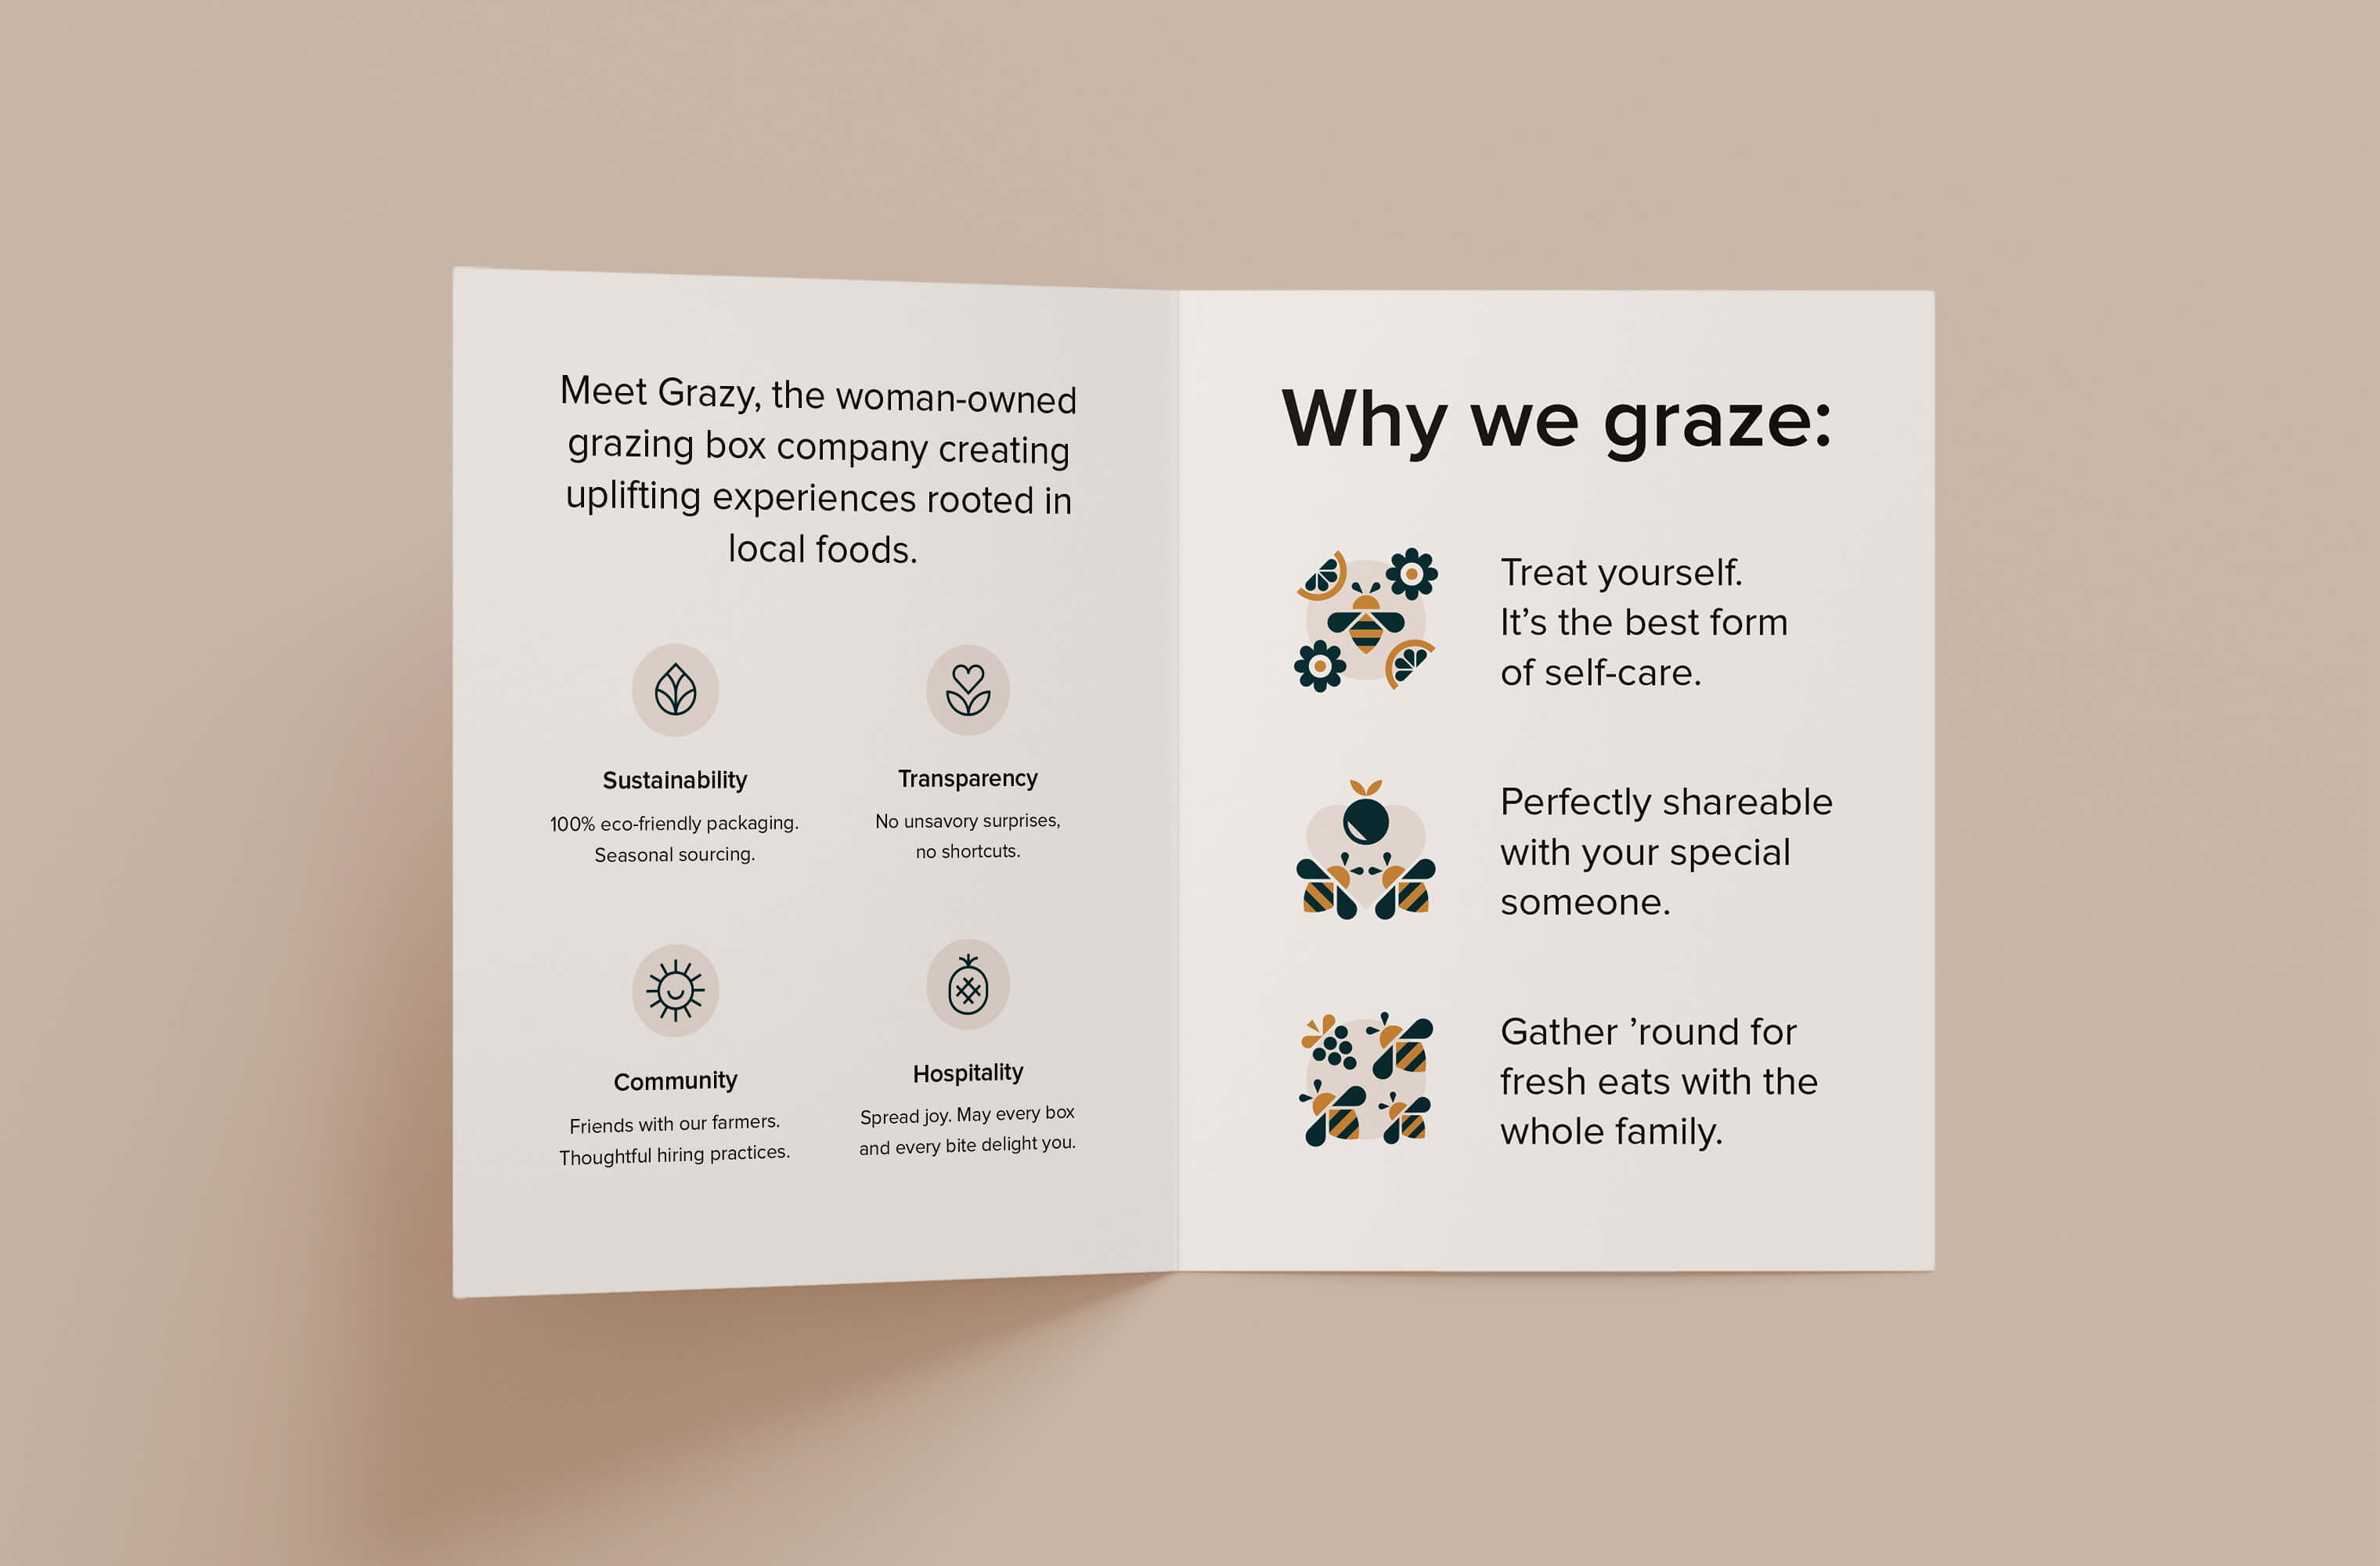 Inside spread of the bifold Grazy booklet